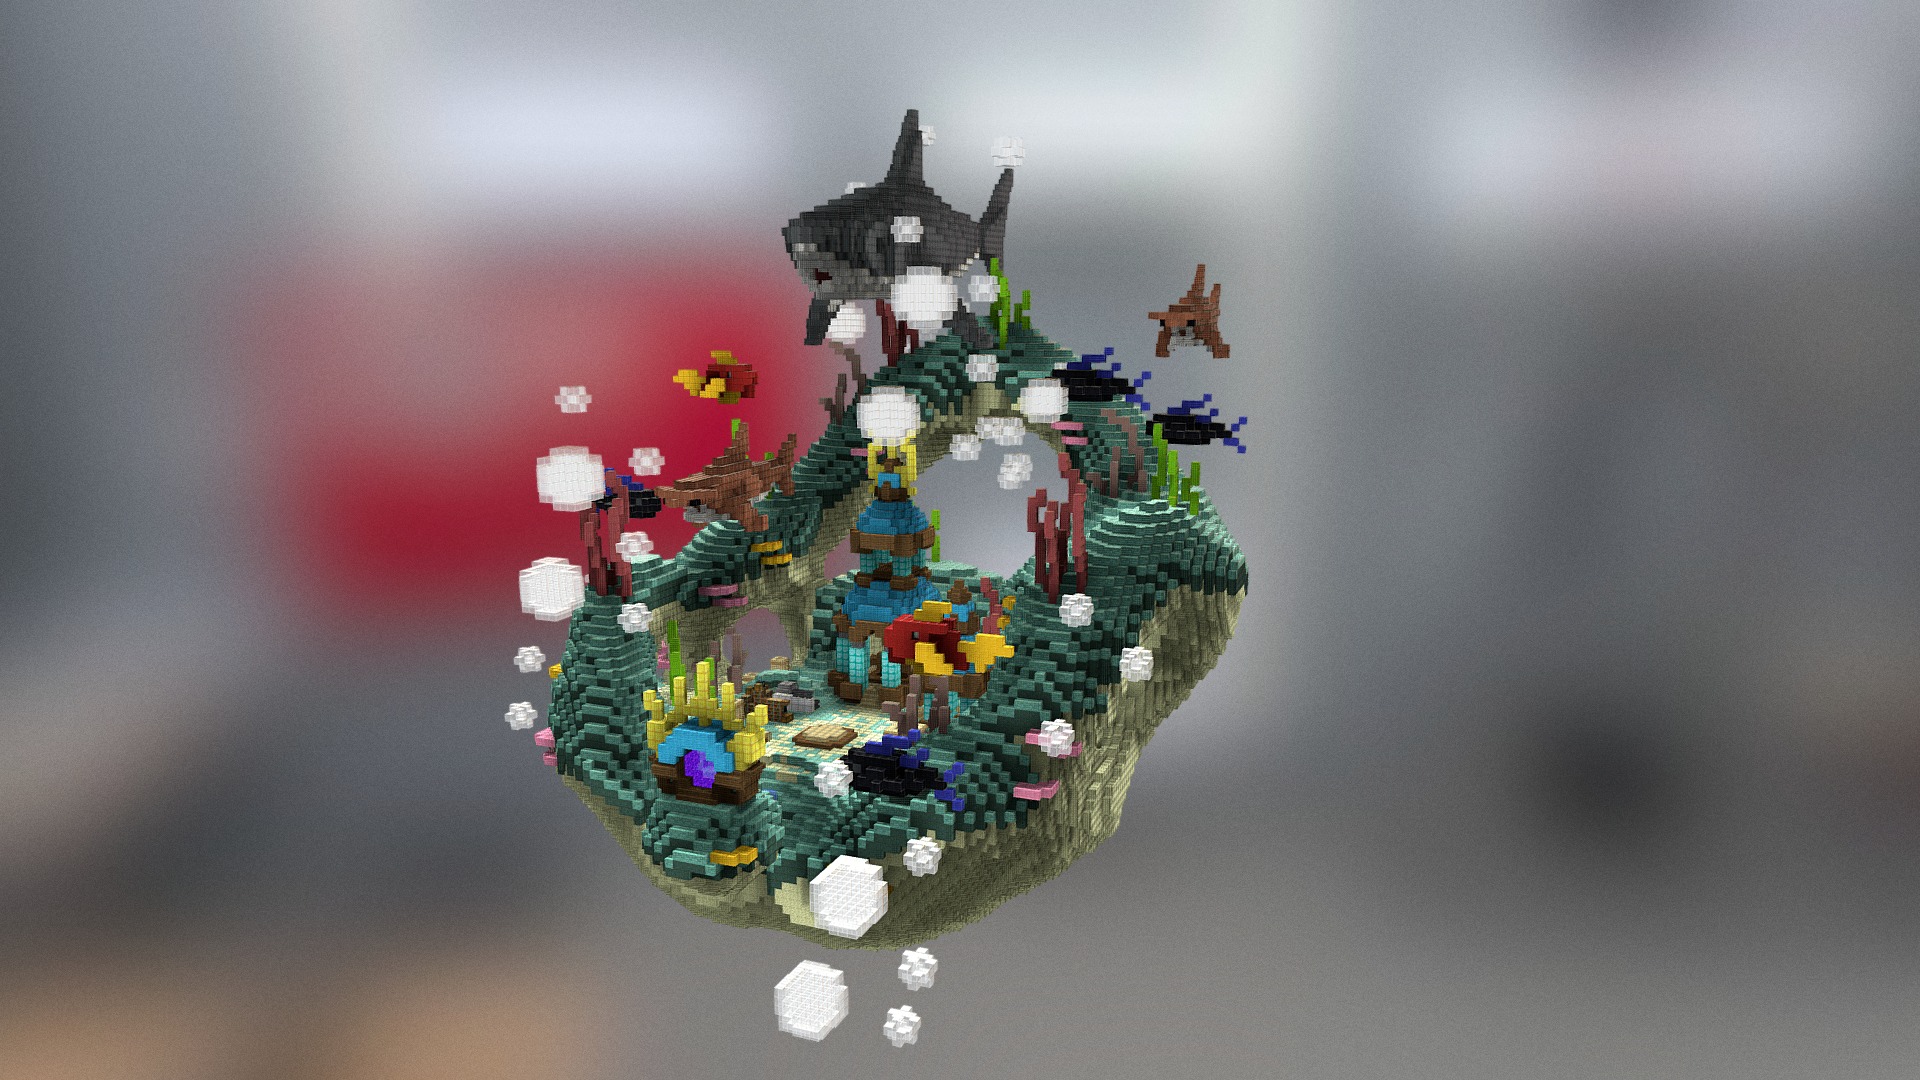 3D model Aquamarine compact spawn-lobby - This is a 3D model of the Aquamarine compact spawn-lobby. The 3D model is about a video game of a castle.